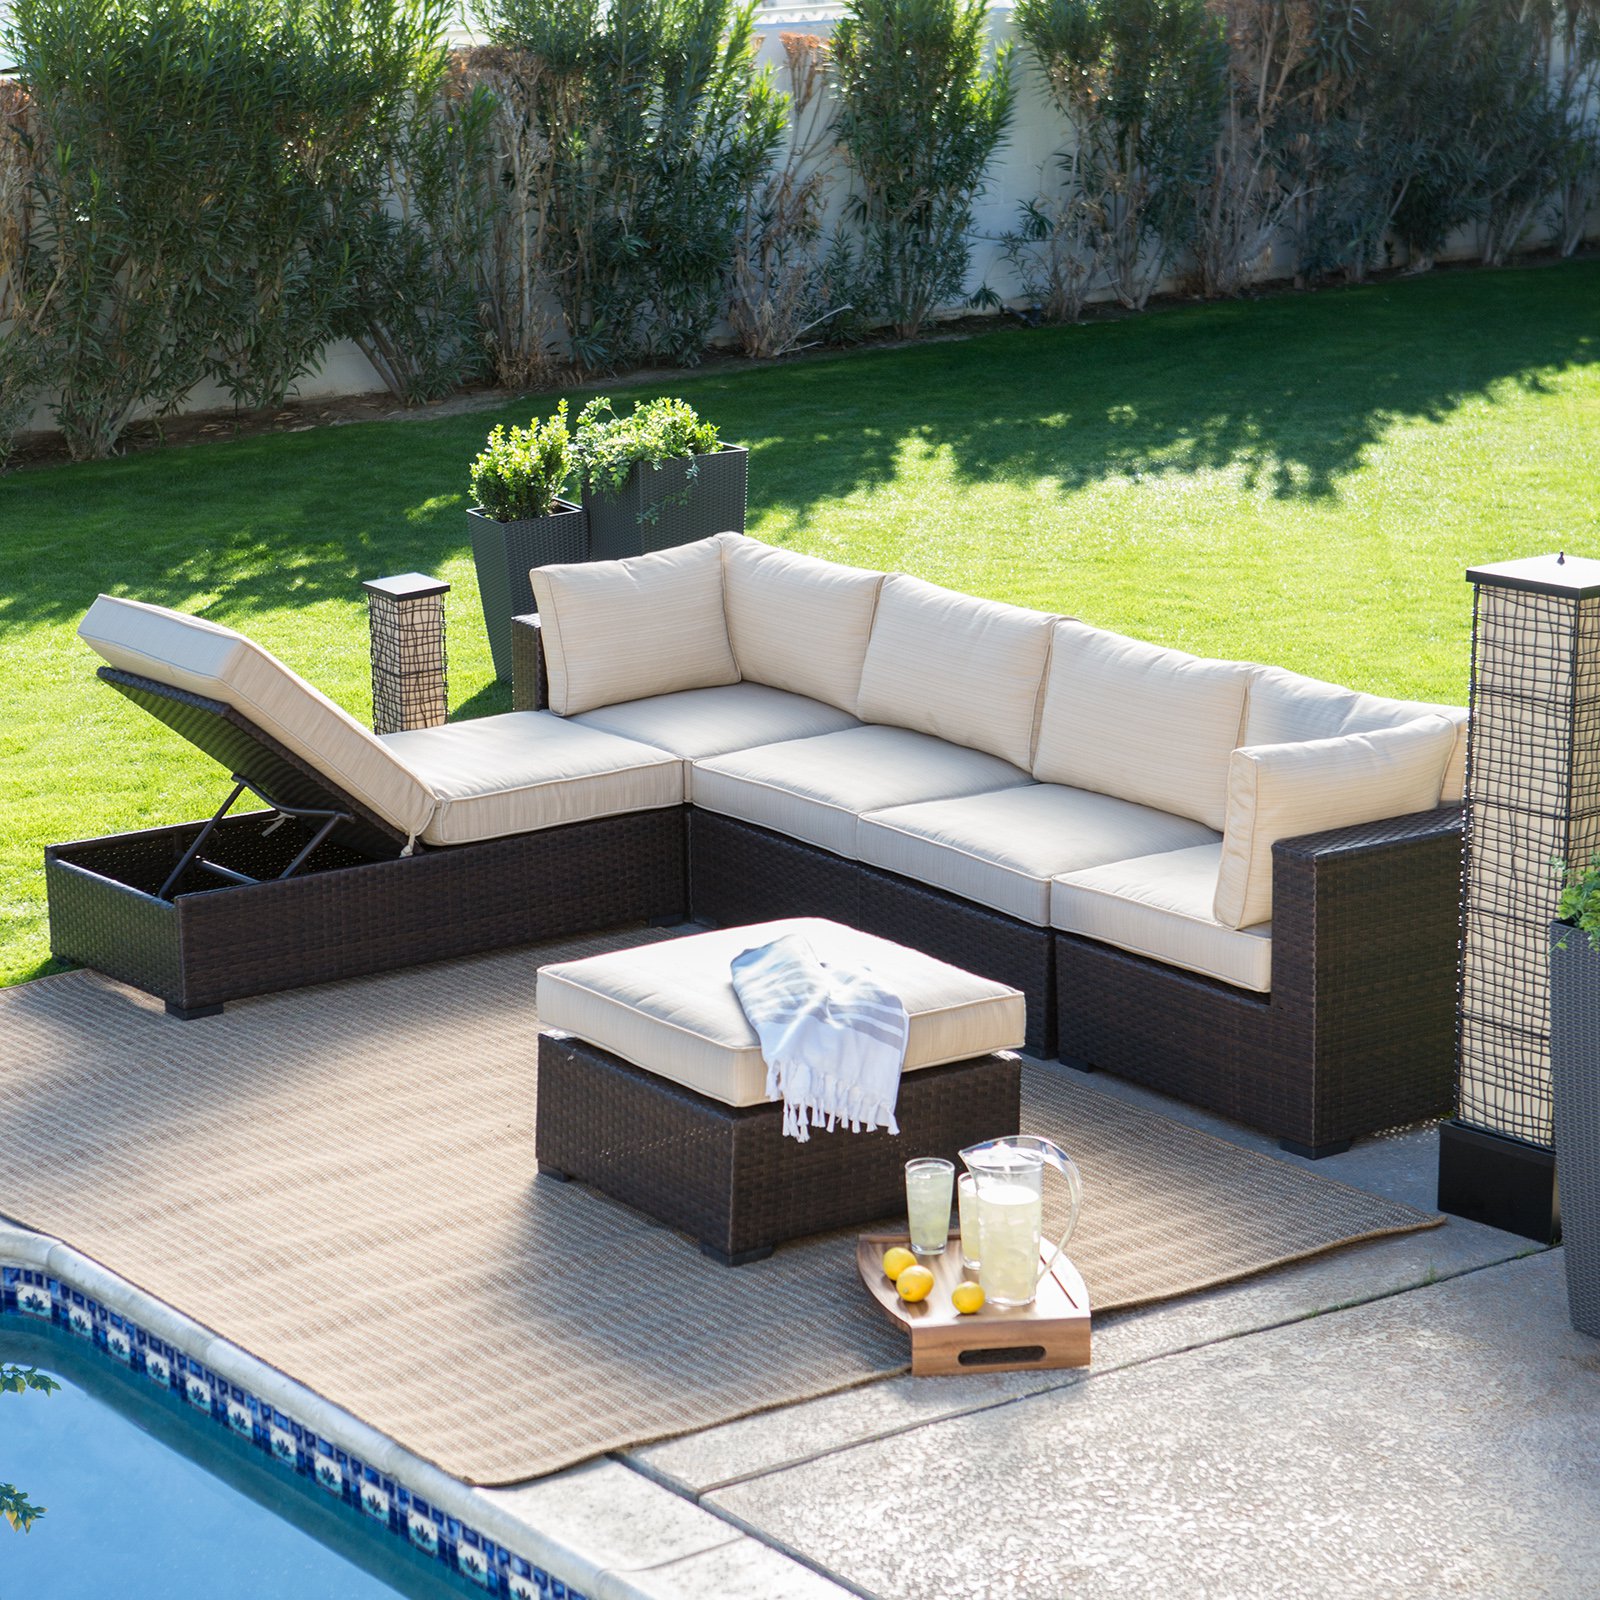 Create a warm place in the outside of the
house with outdoor sectional